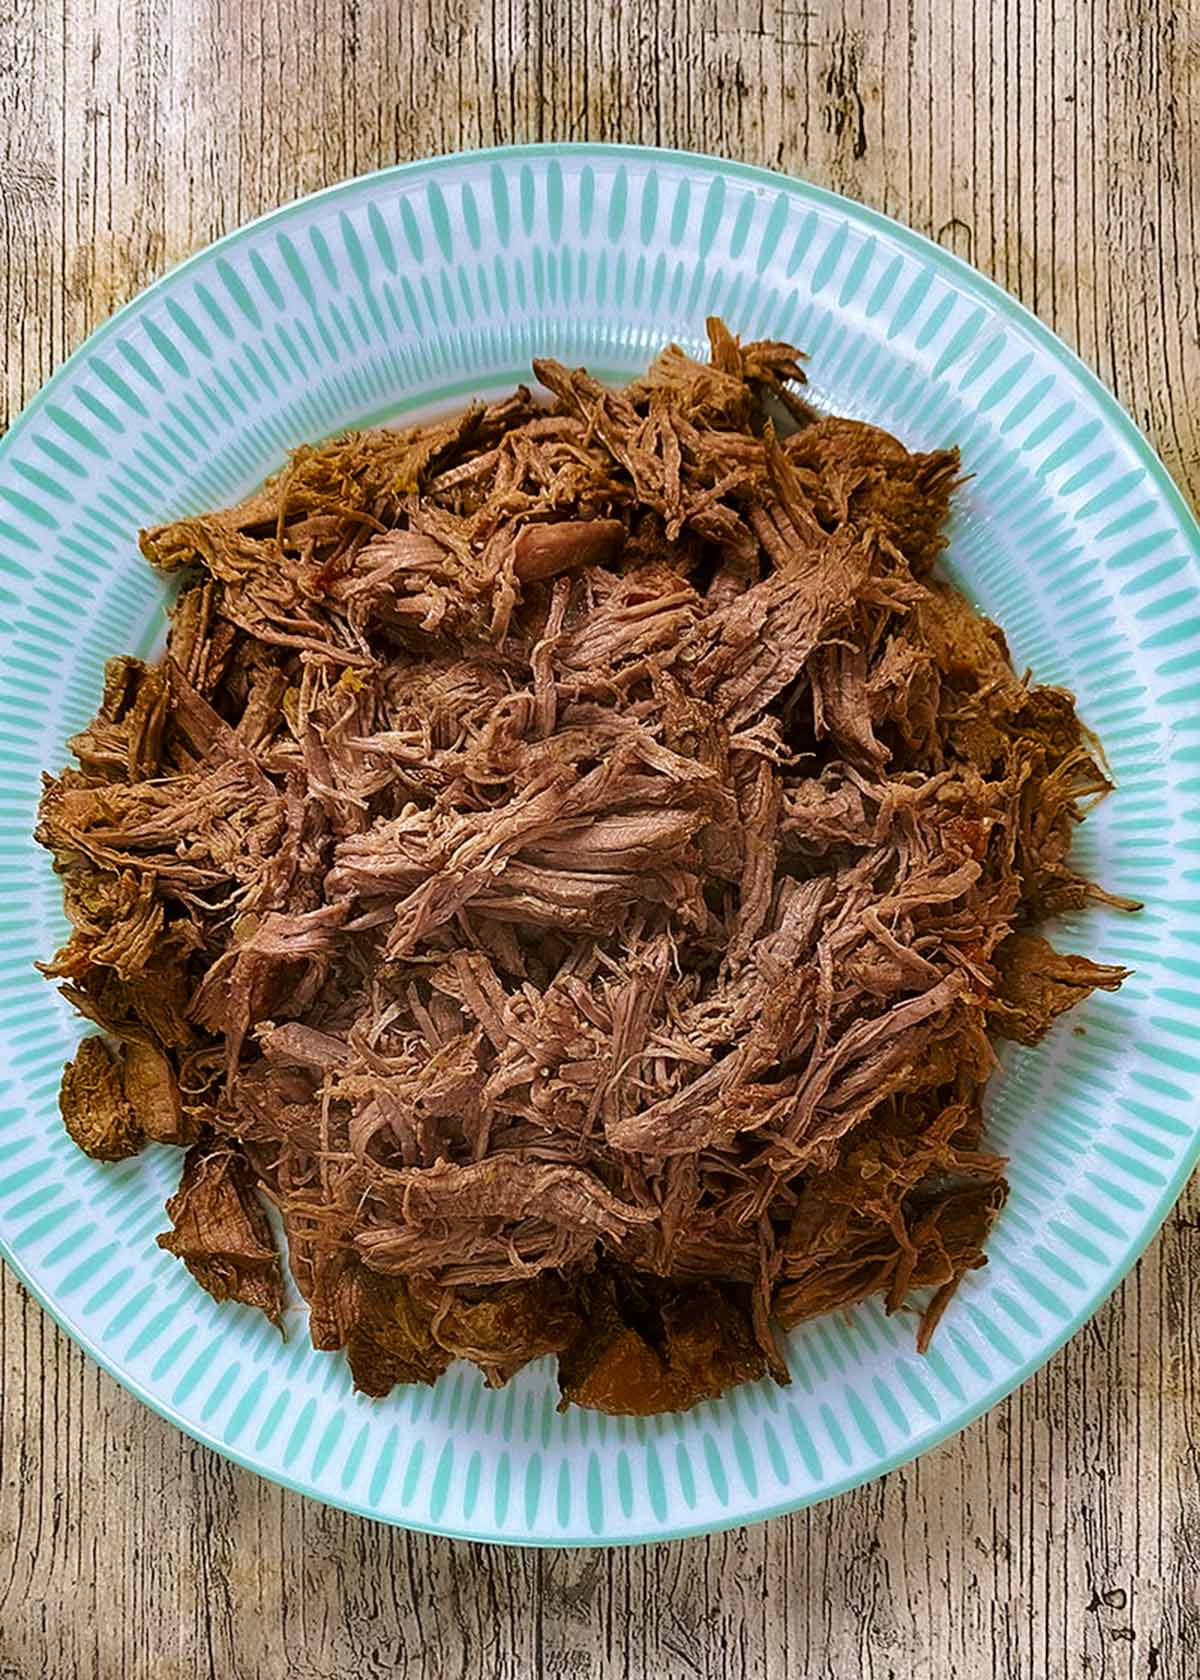 Shredded cooked beef on a plate.